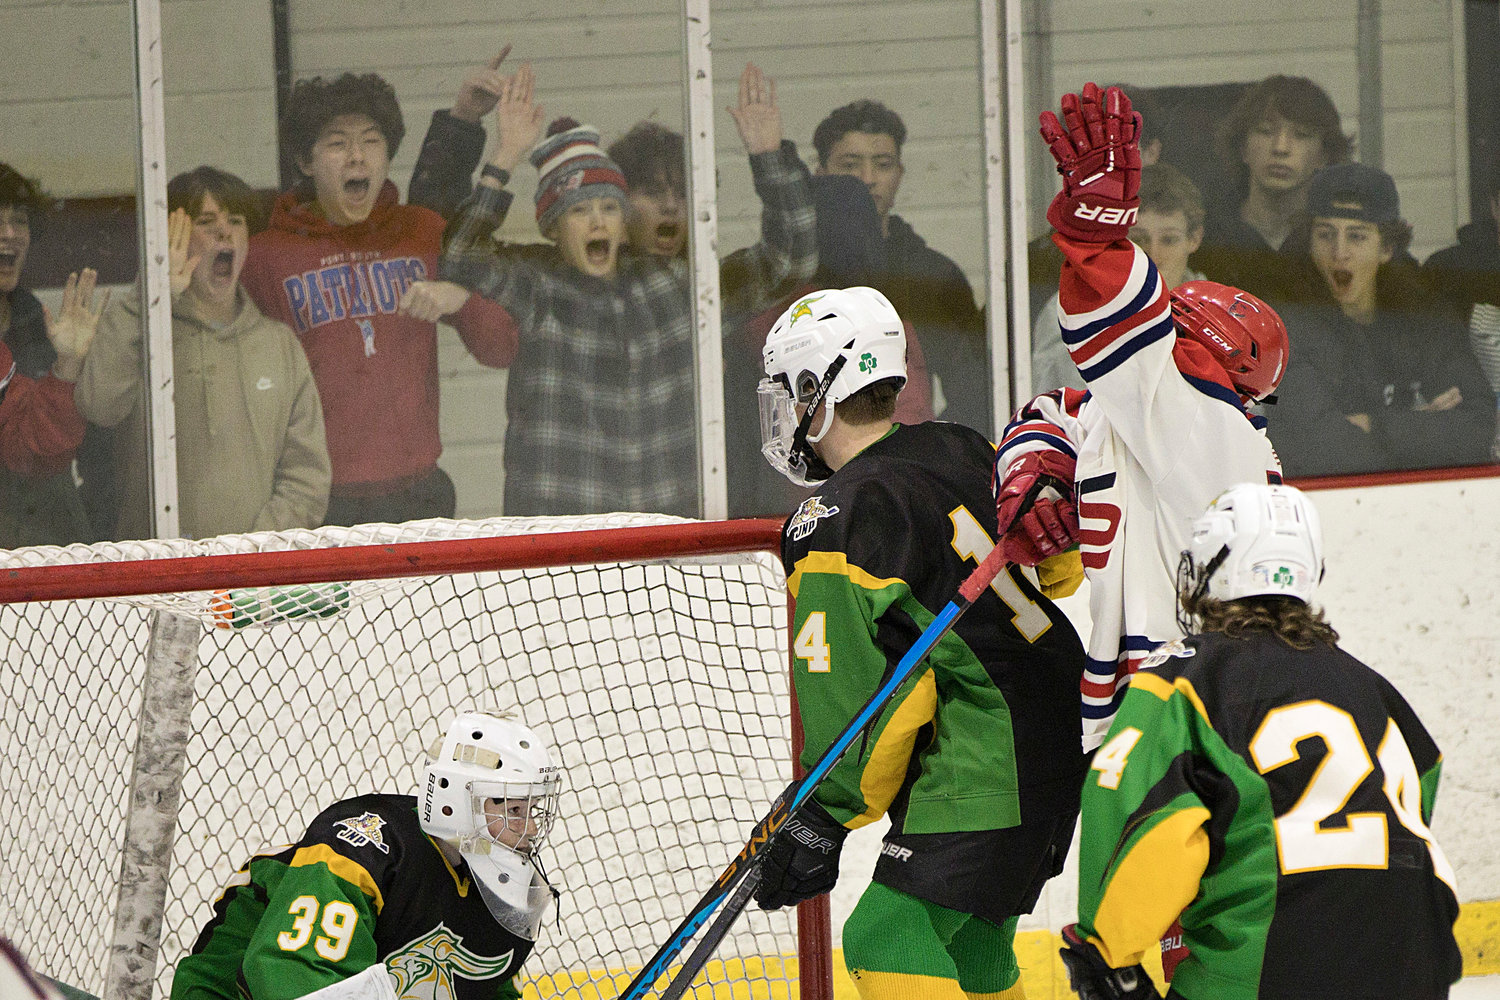 Portsmouth High’s Joseph Leveault (right) waves to fan after scoring a power-play goal in the first period of the opening game of the Division II quarterfinals against North Smithfield Friday at Portsmouth Abbey.